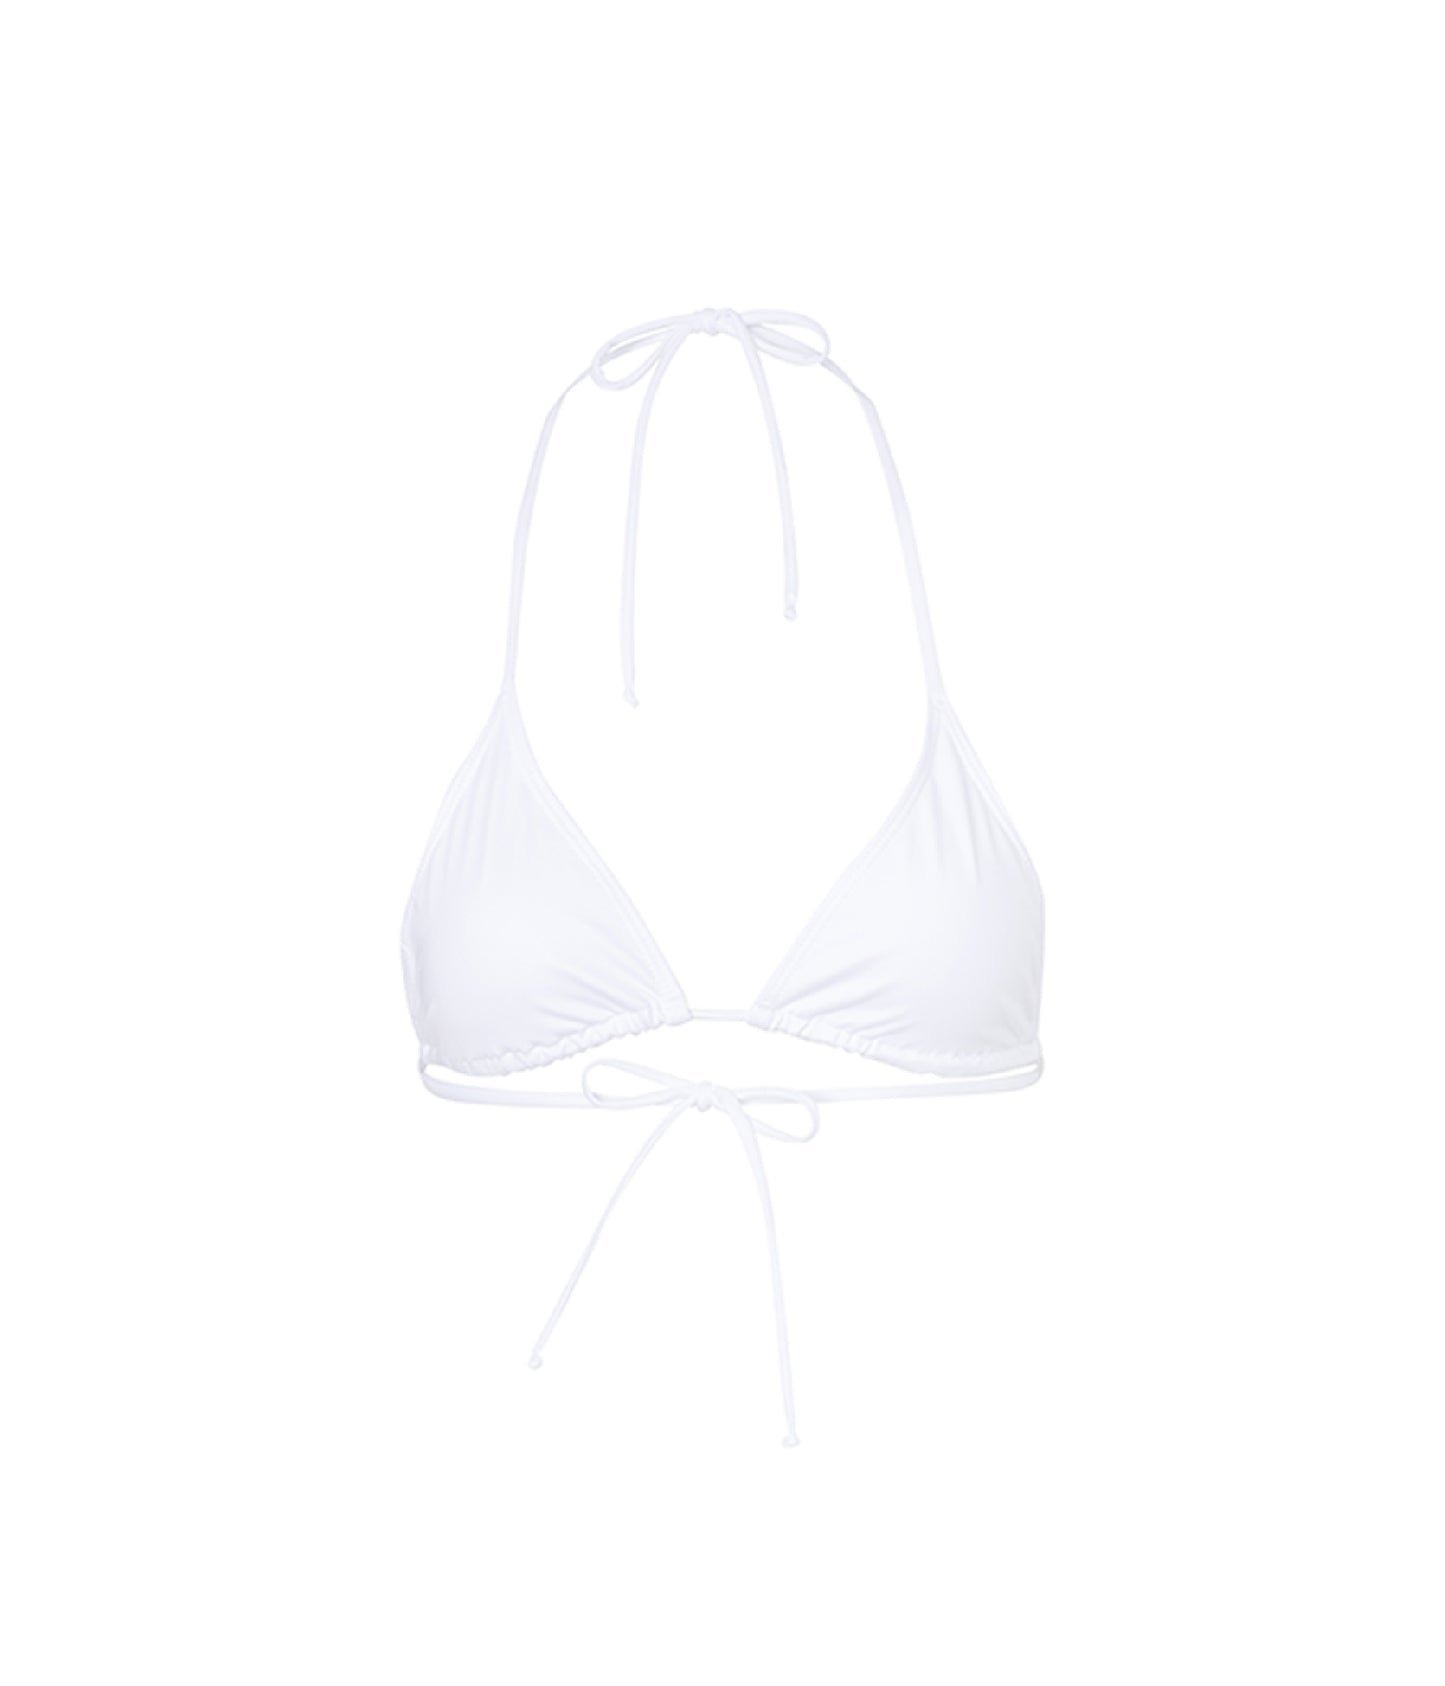 Load image into Gallery viewer, Verdelimon - Bikini Top - Moa - Printed - White - Front
